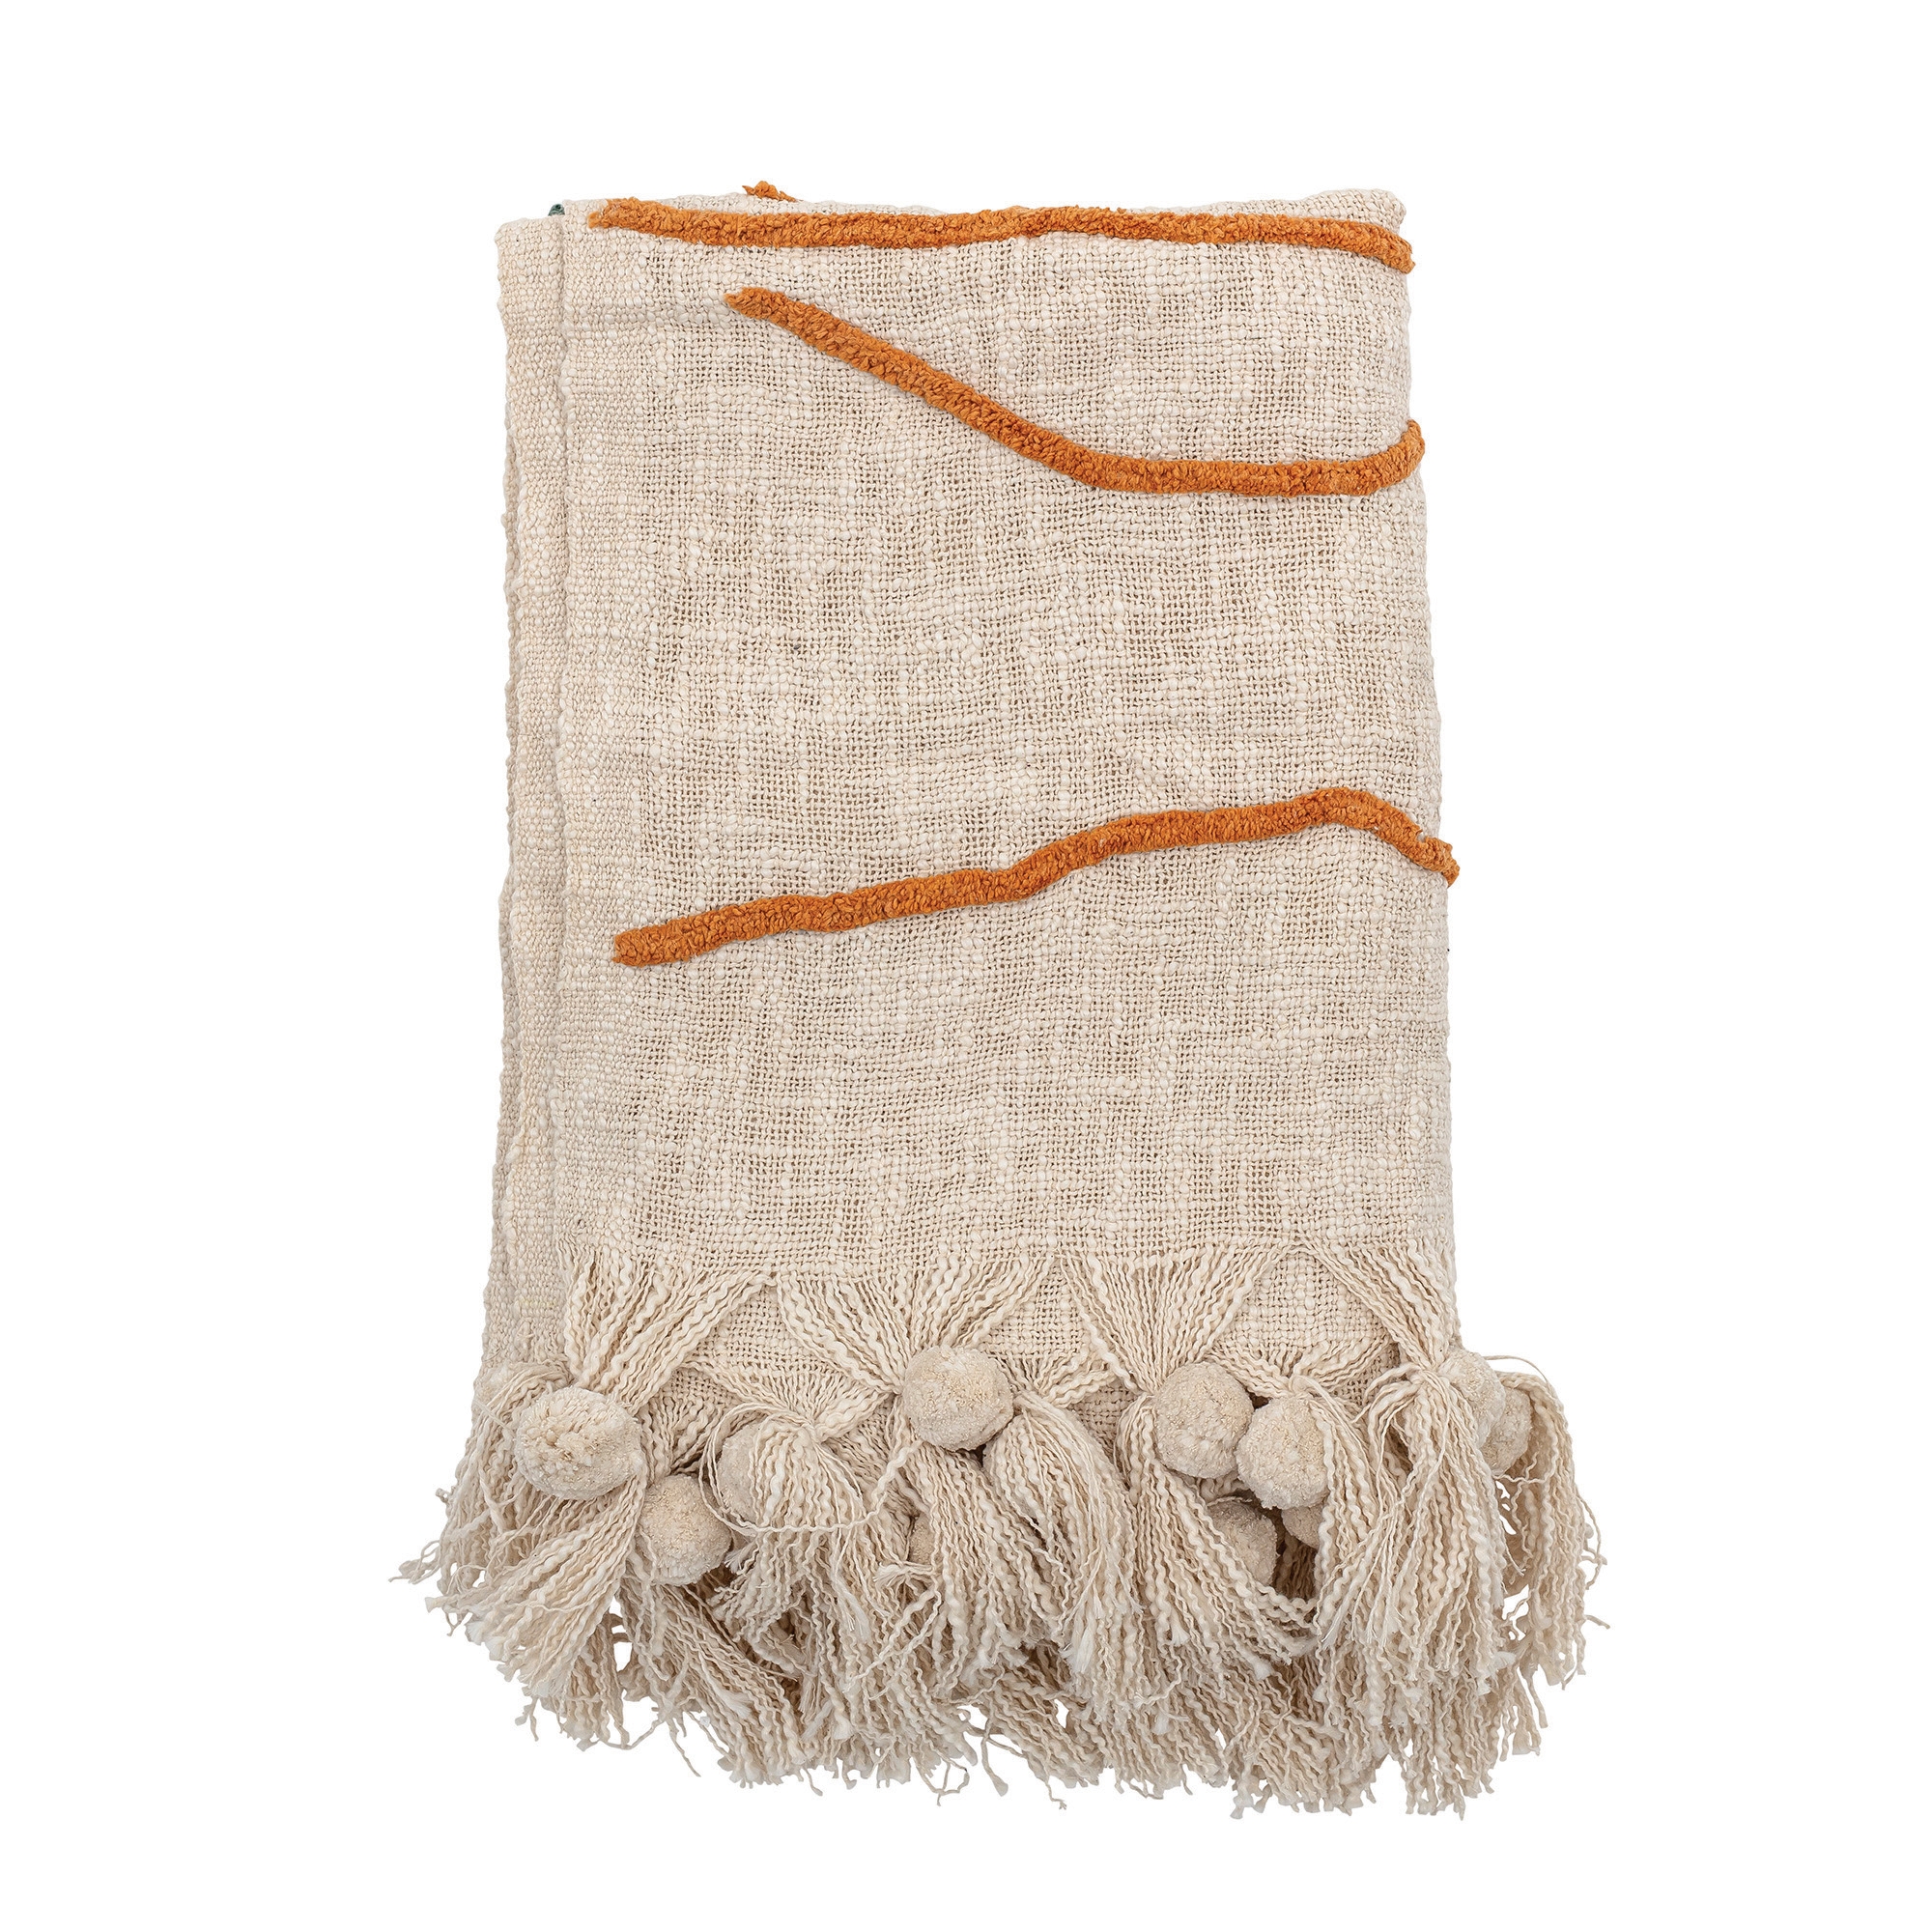 Cotton Embroidered Throw Blanket with Tassels, Cream - Image 1